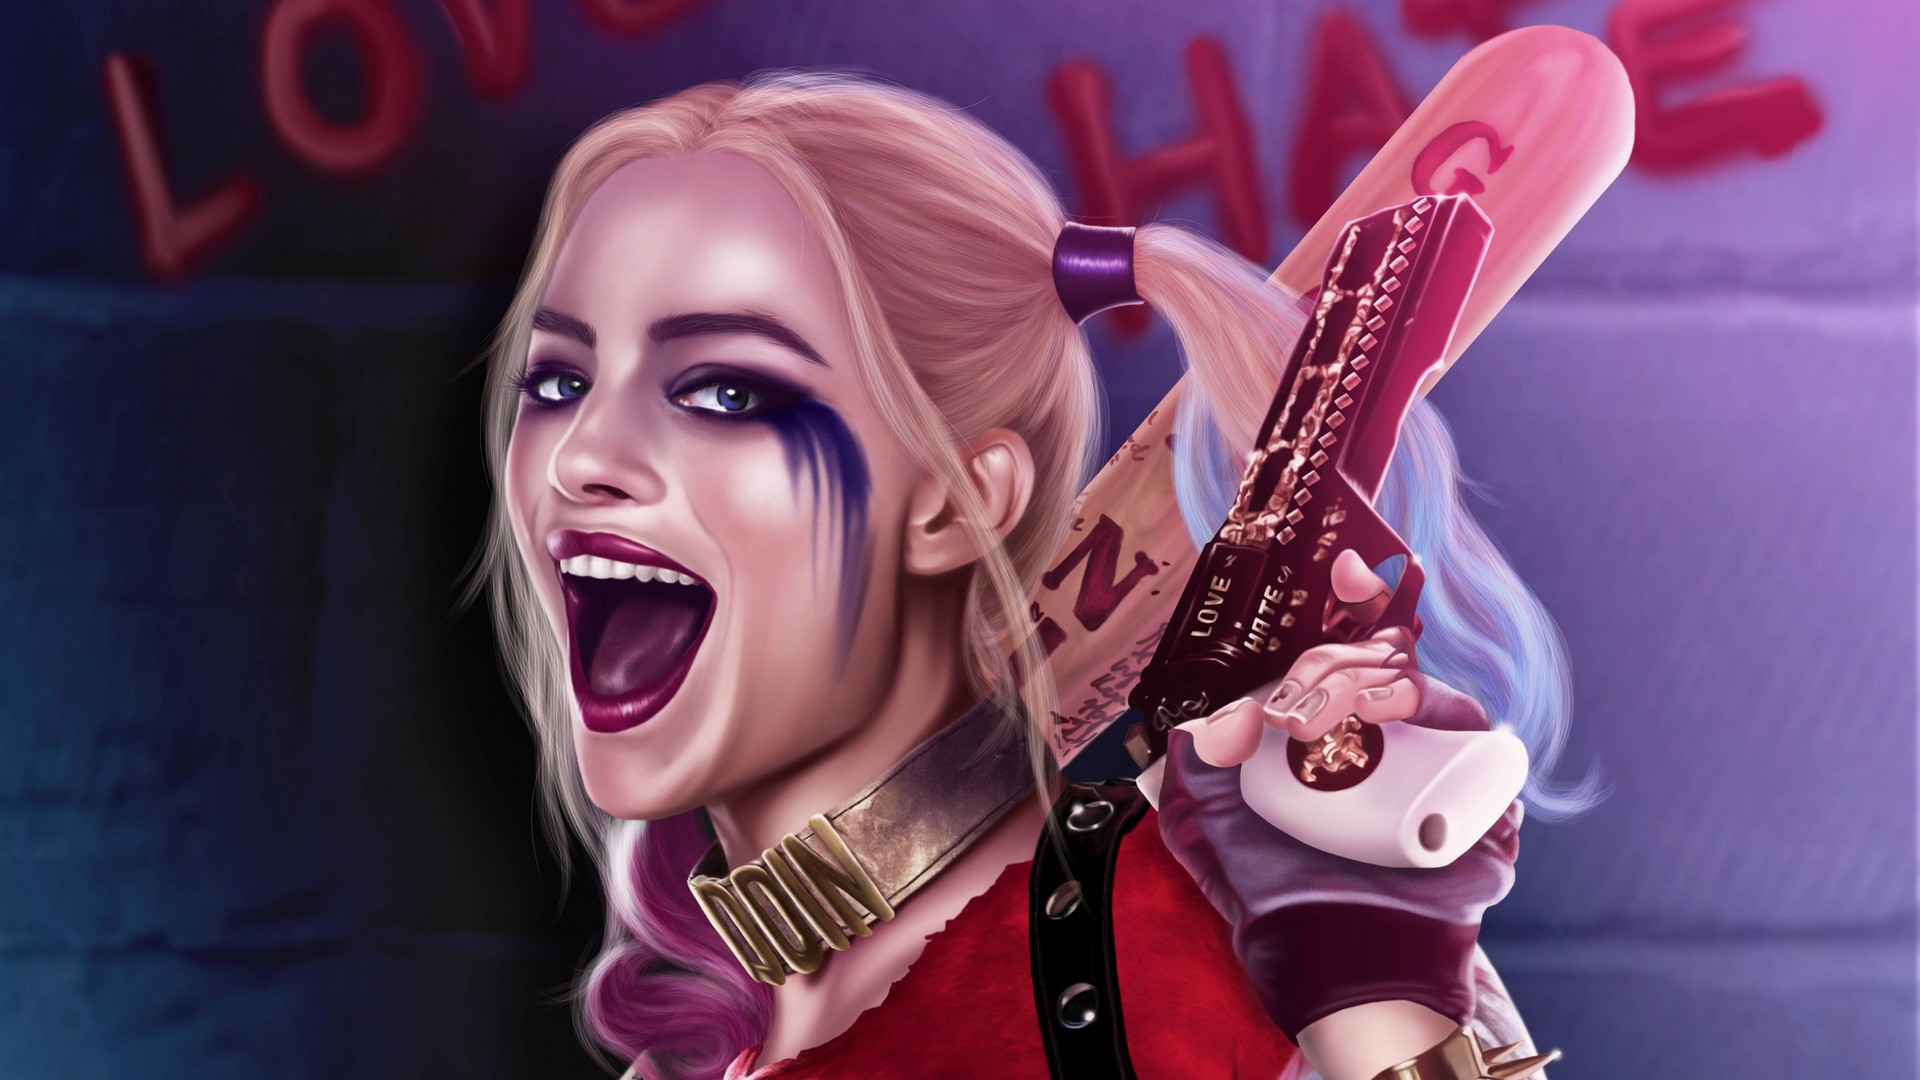 Harley Quinn The Movie Wallpaper For Desktop with image resolution 1920x1080 pixel. You can use this wallpaper as background for your desktop Computer Screensavers, Android or iPhone smartphones